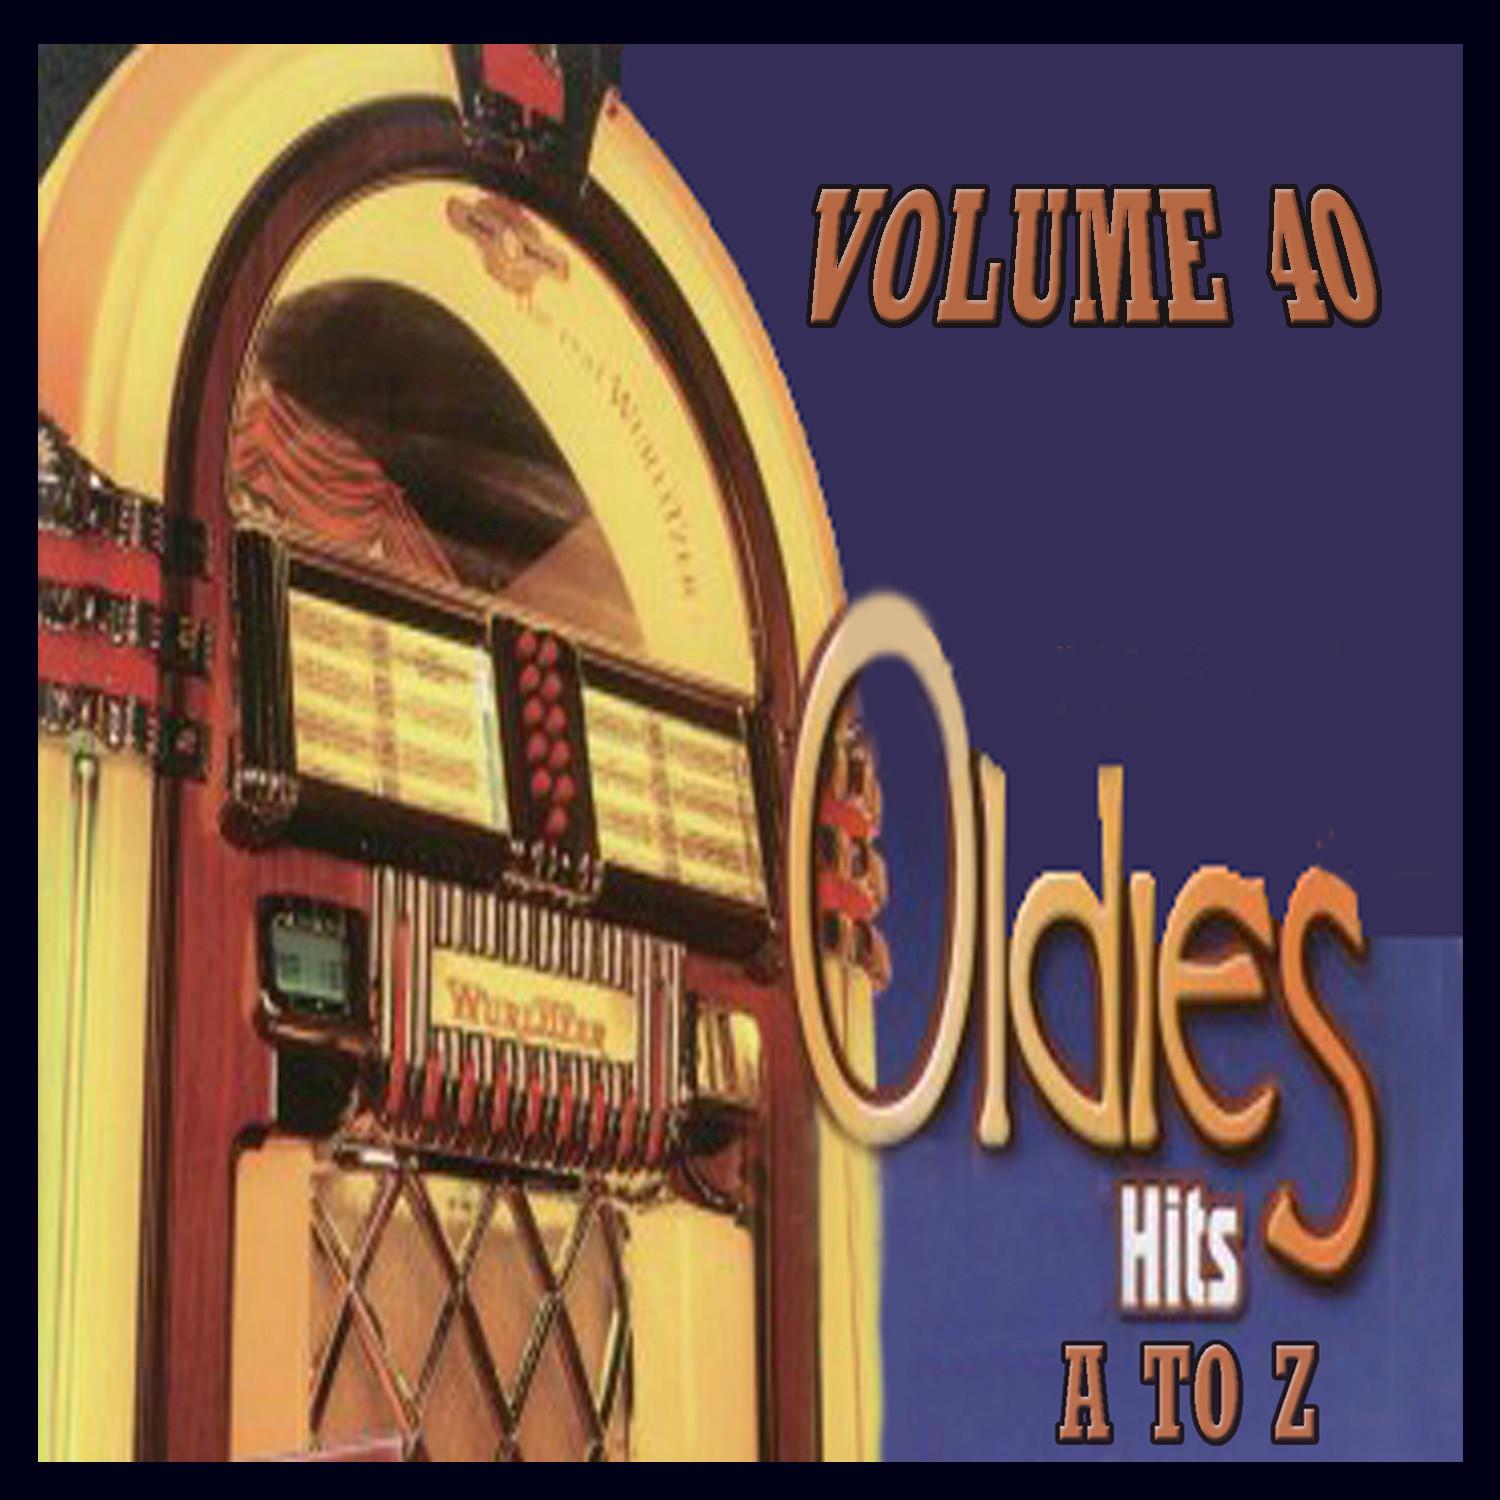 Oldies Hits A to Z, Vol.40